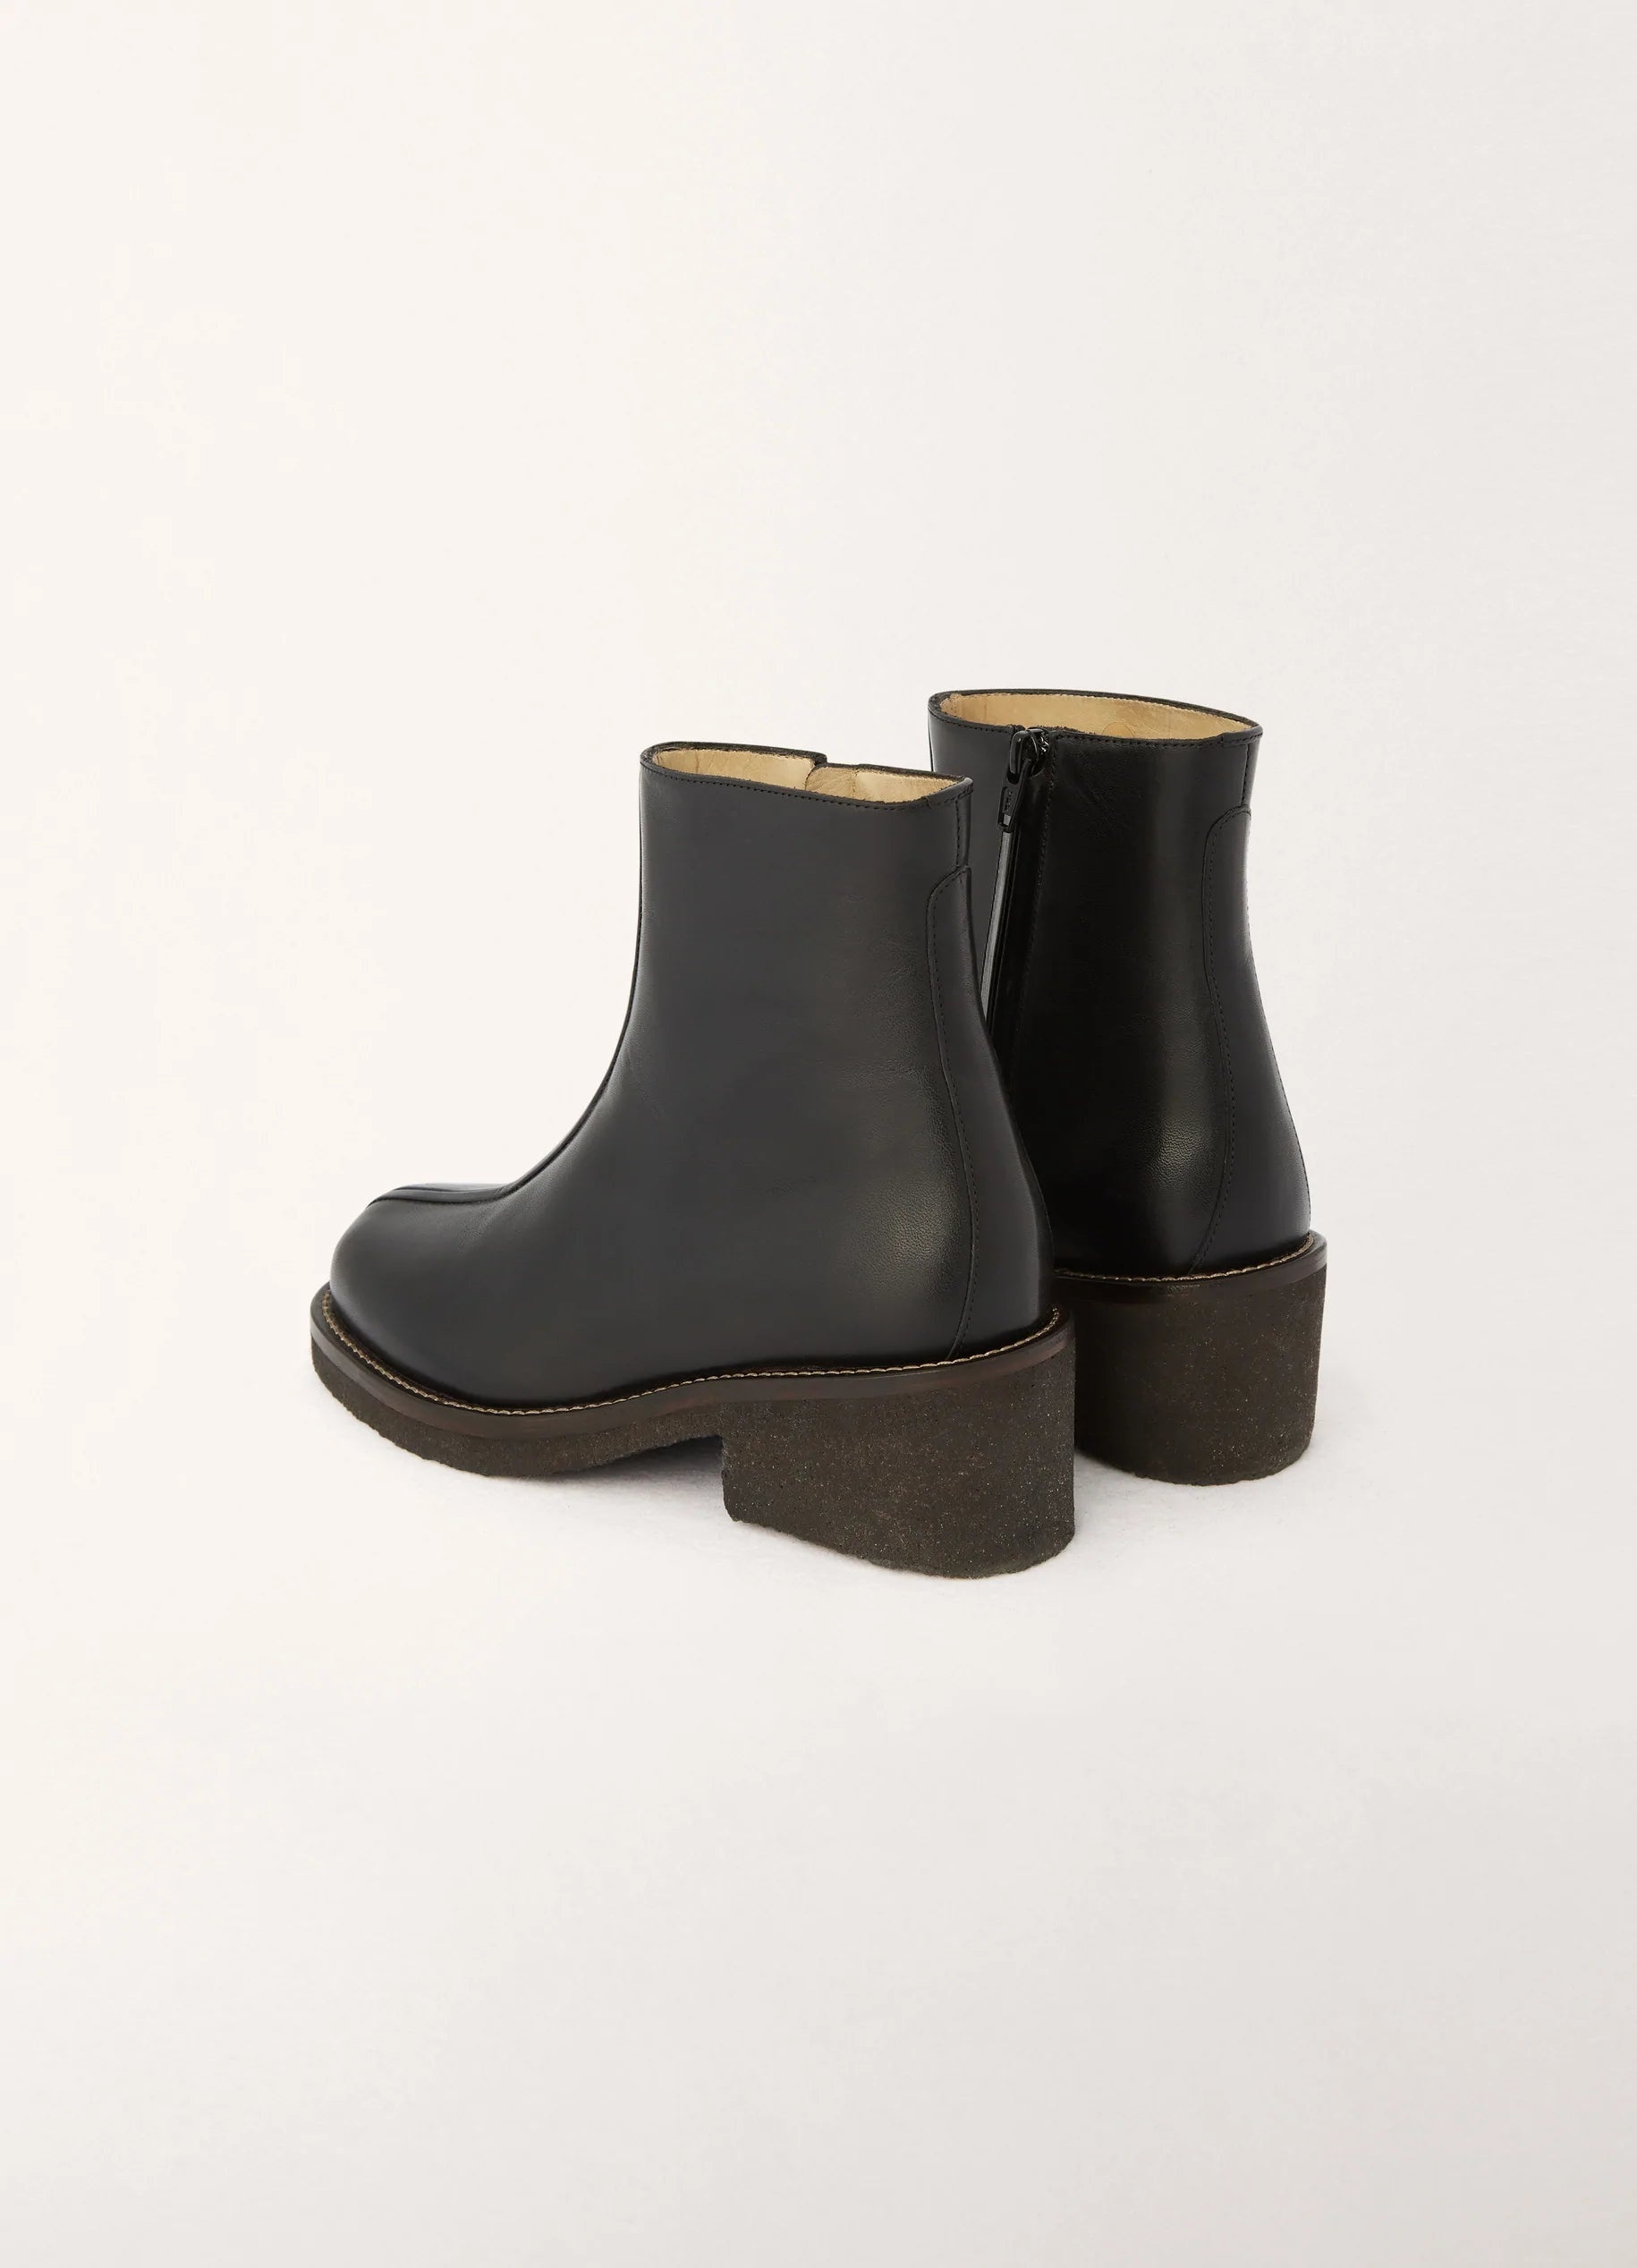 WOMEN PIPED HEELED BOOTS
VEGE TANNED LTH - 4